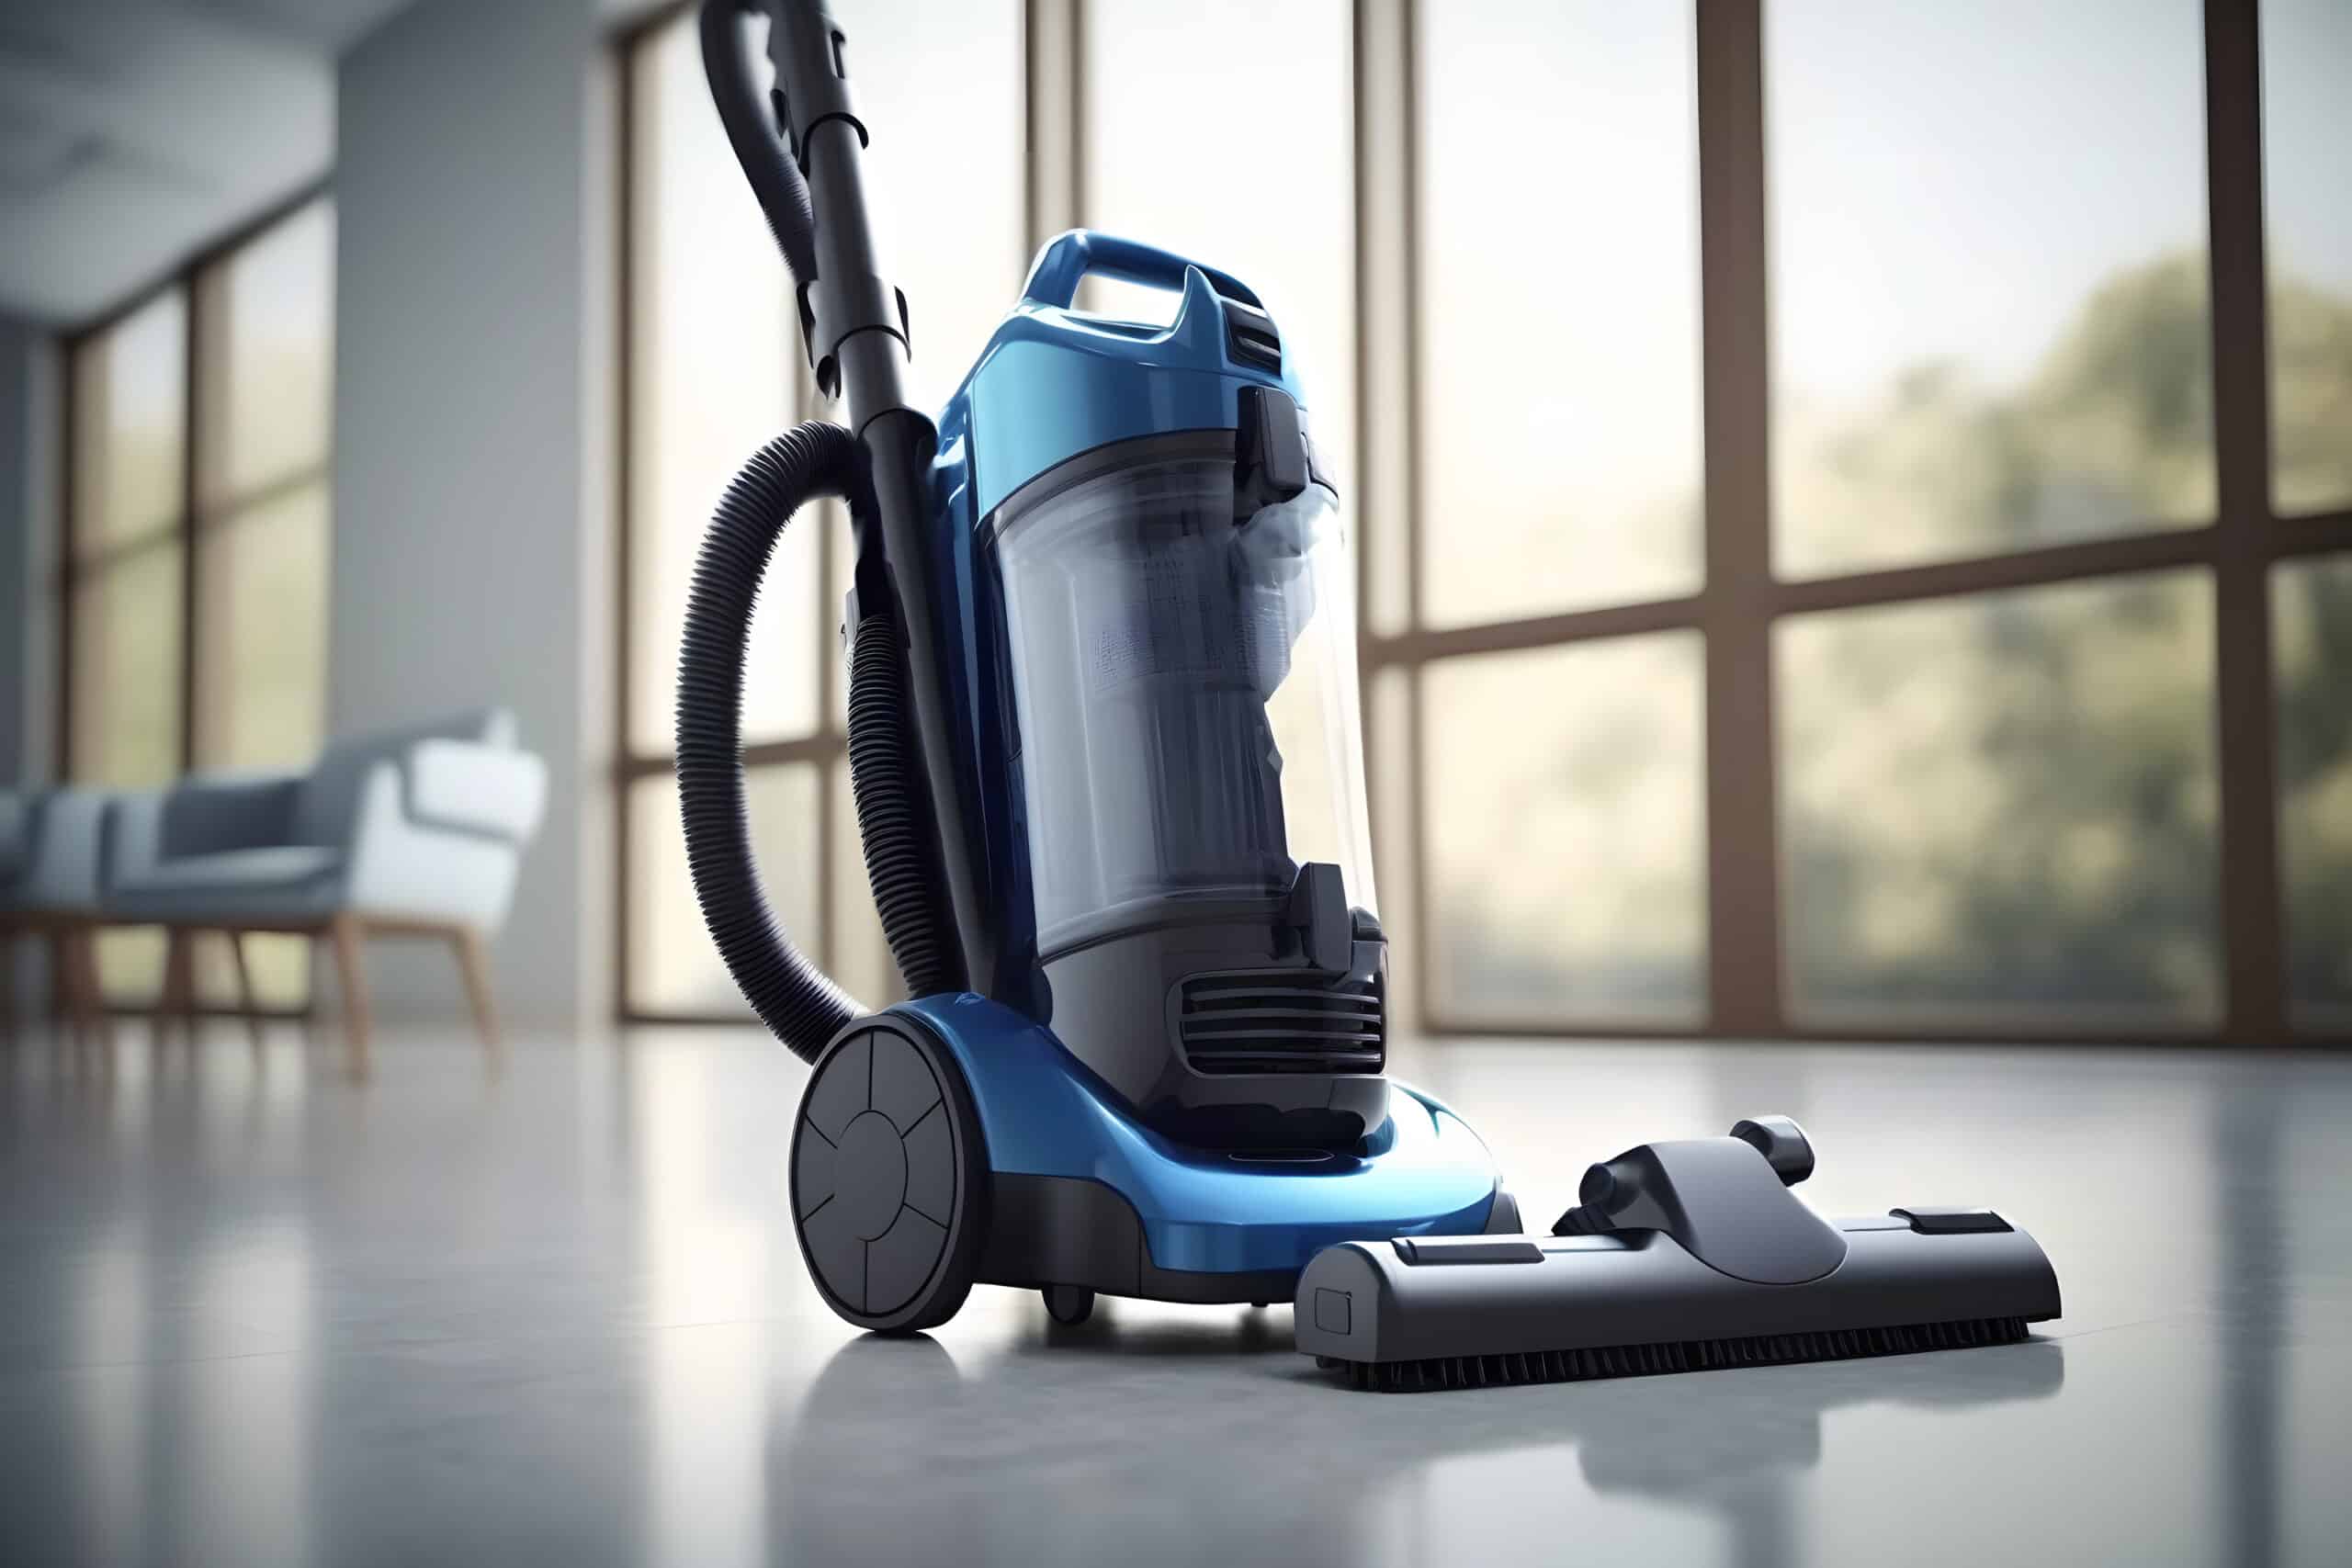 www.appr.com : How do you switch a shop vac from blower to vacuum?